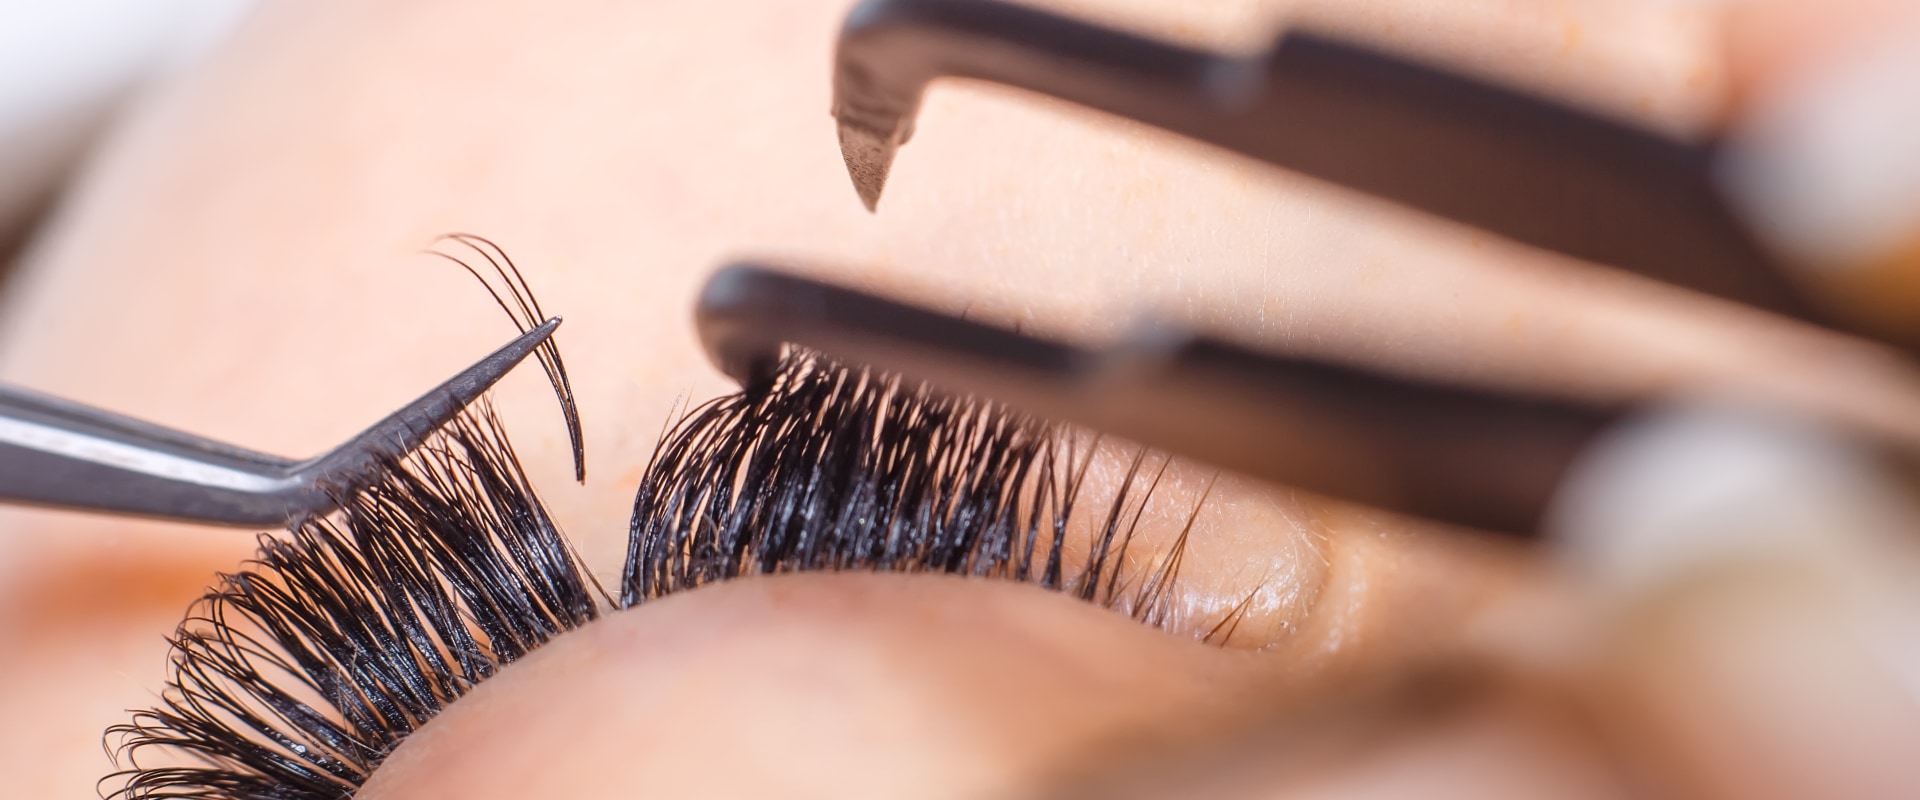 Are eyelash extensions attached to your eyelashes?